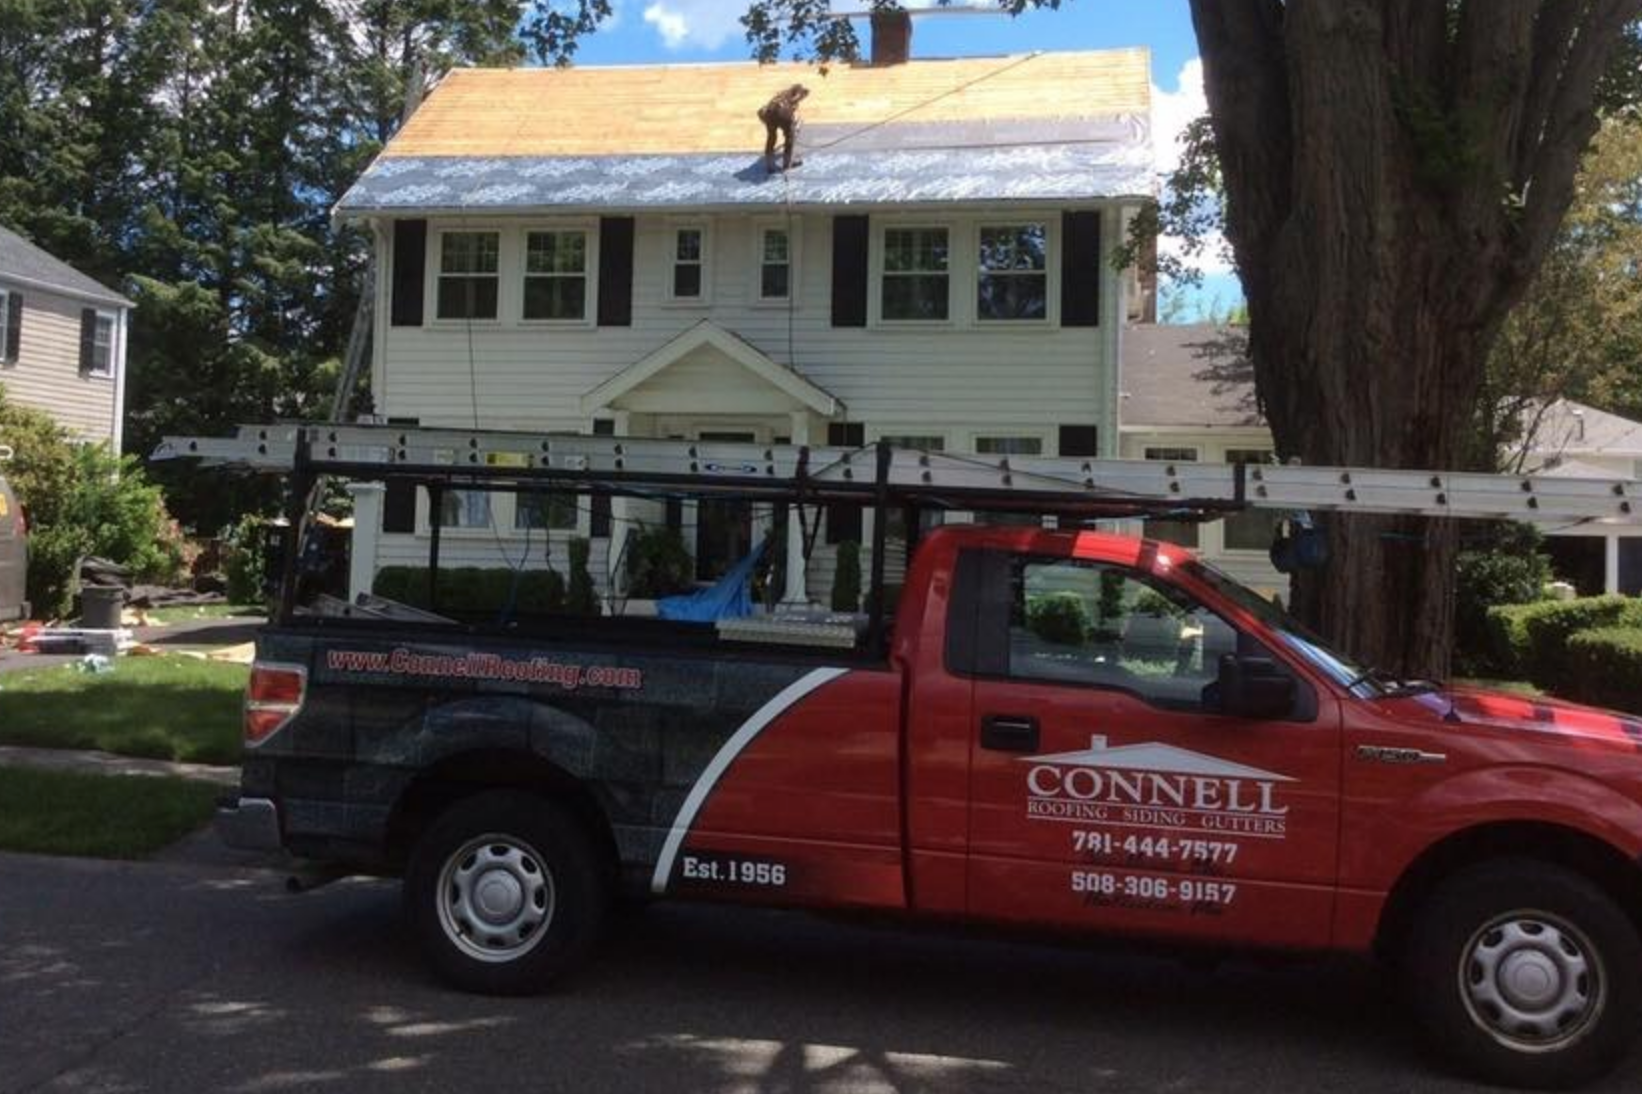 Connell Roofing, LLC Photo